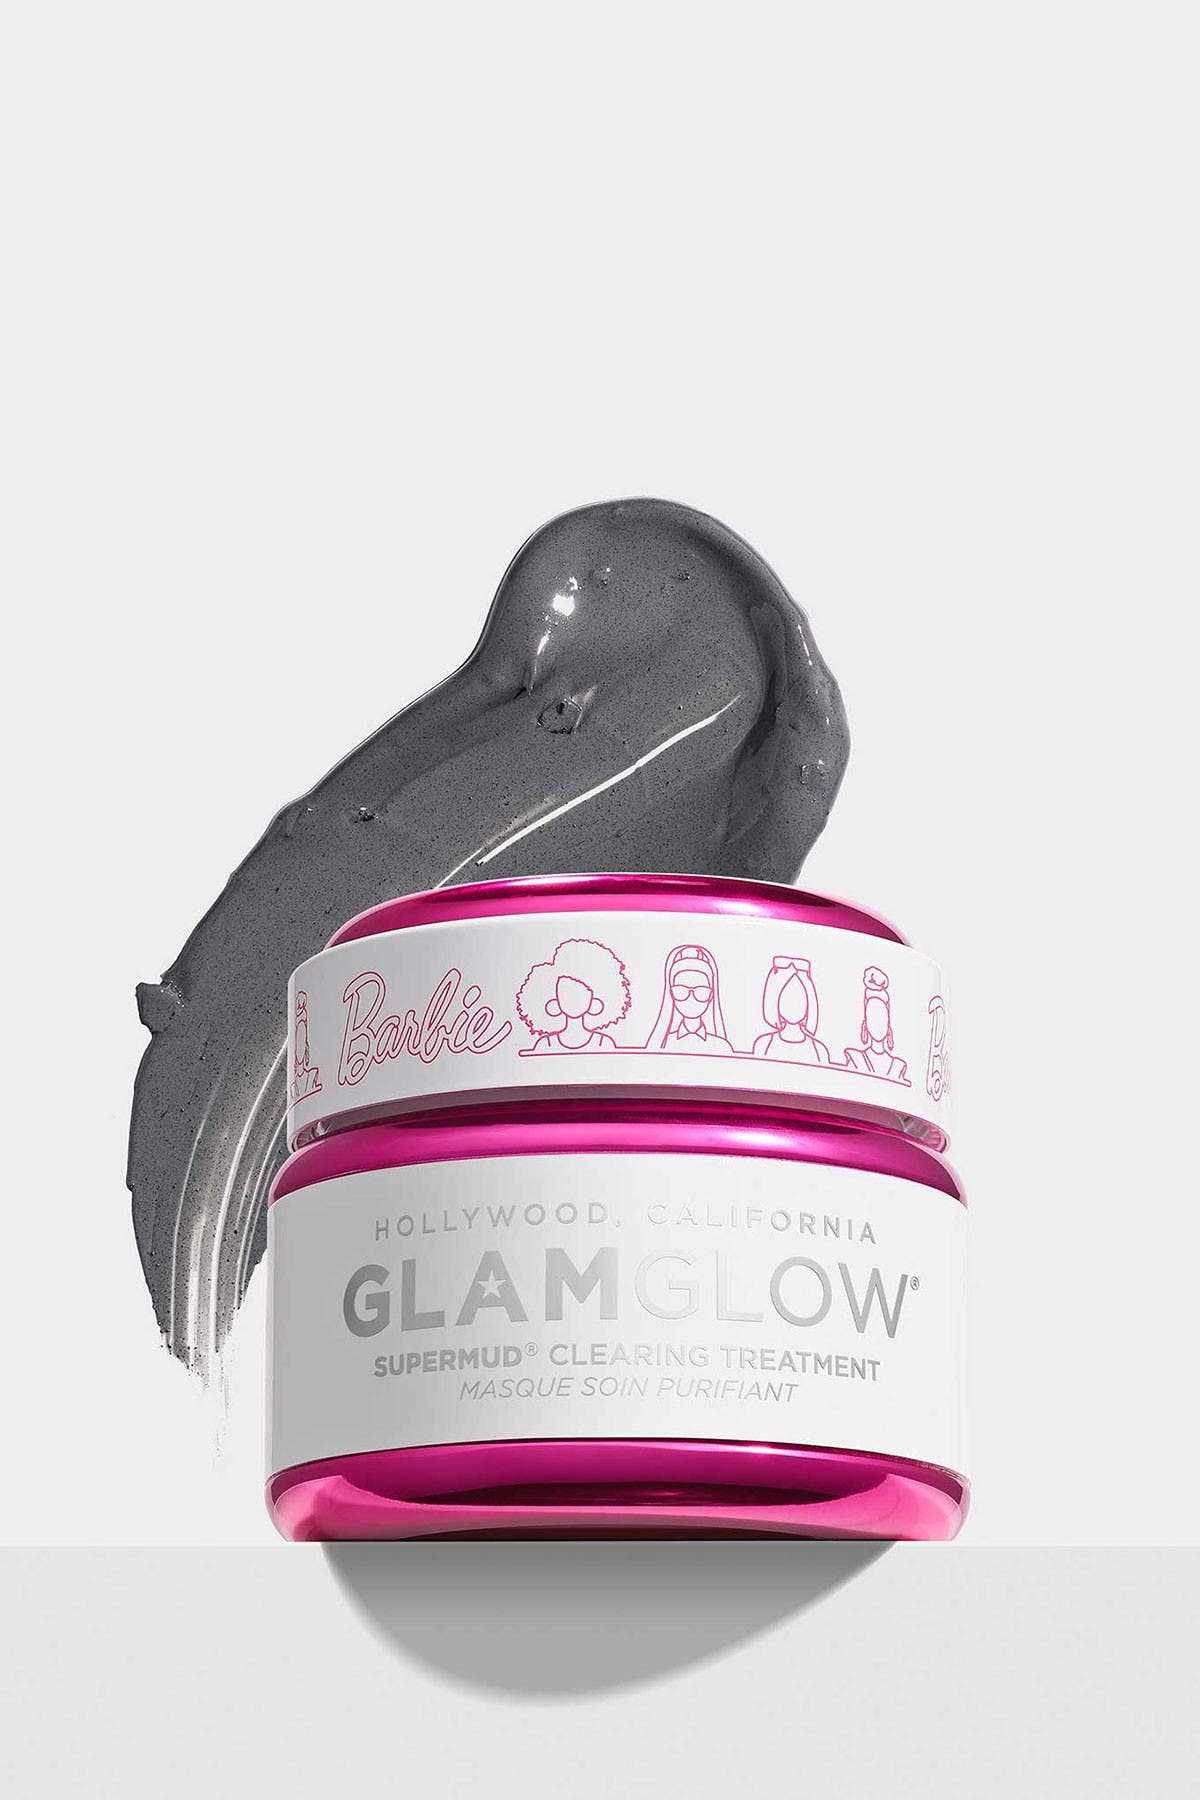 Glamglow Limited Edition Supermud® Clearing Instant Treatment Mask